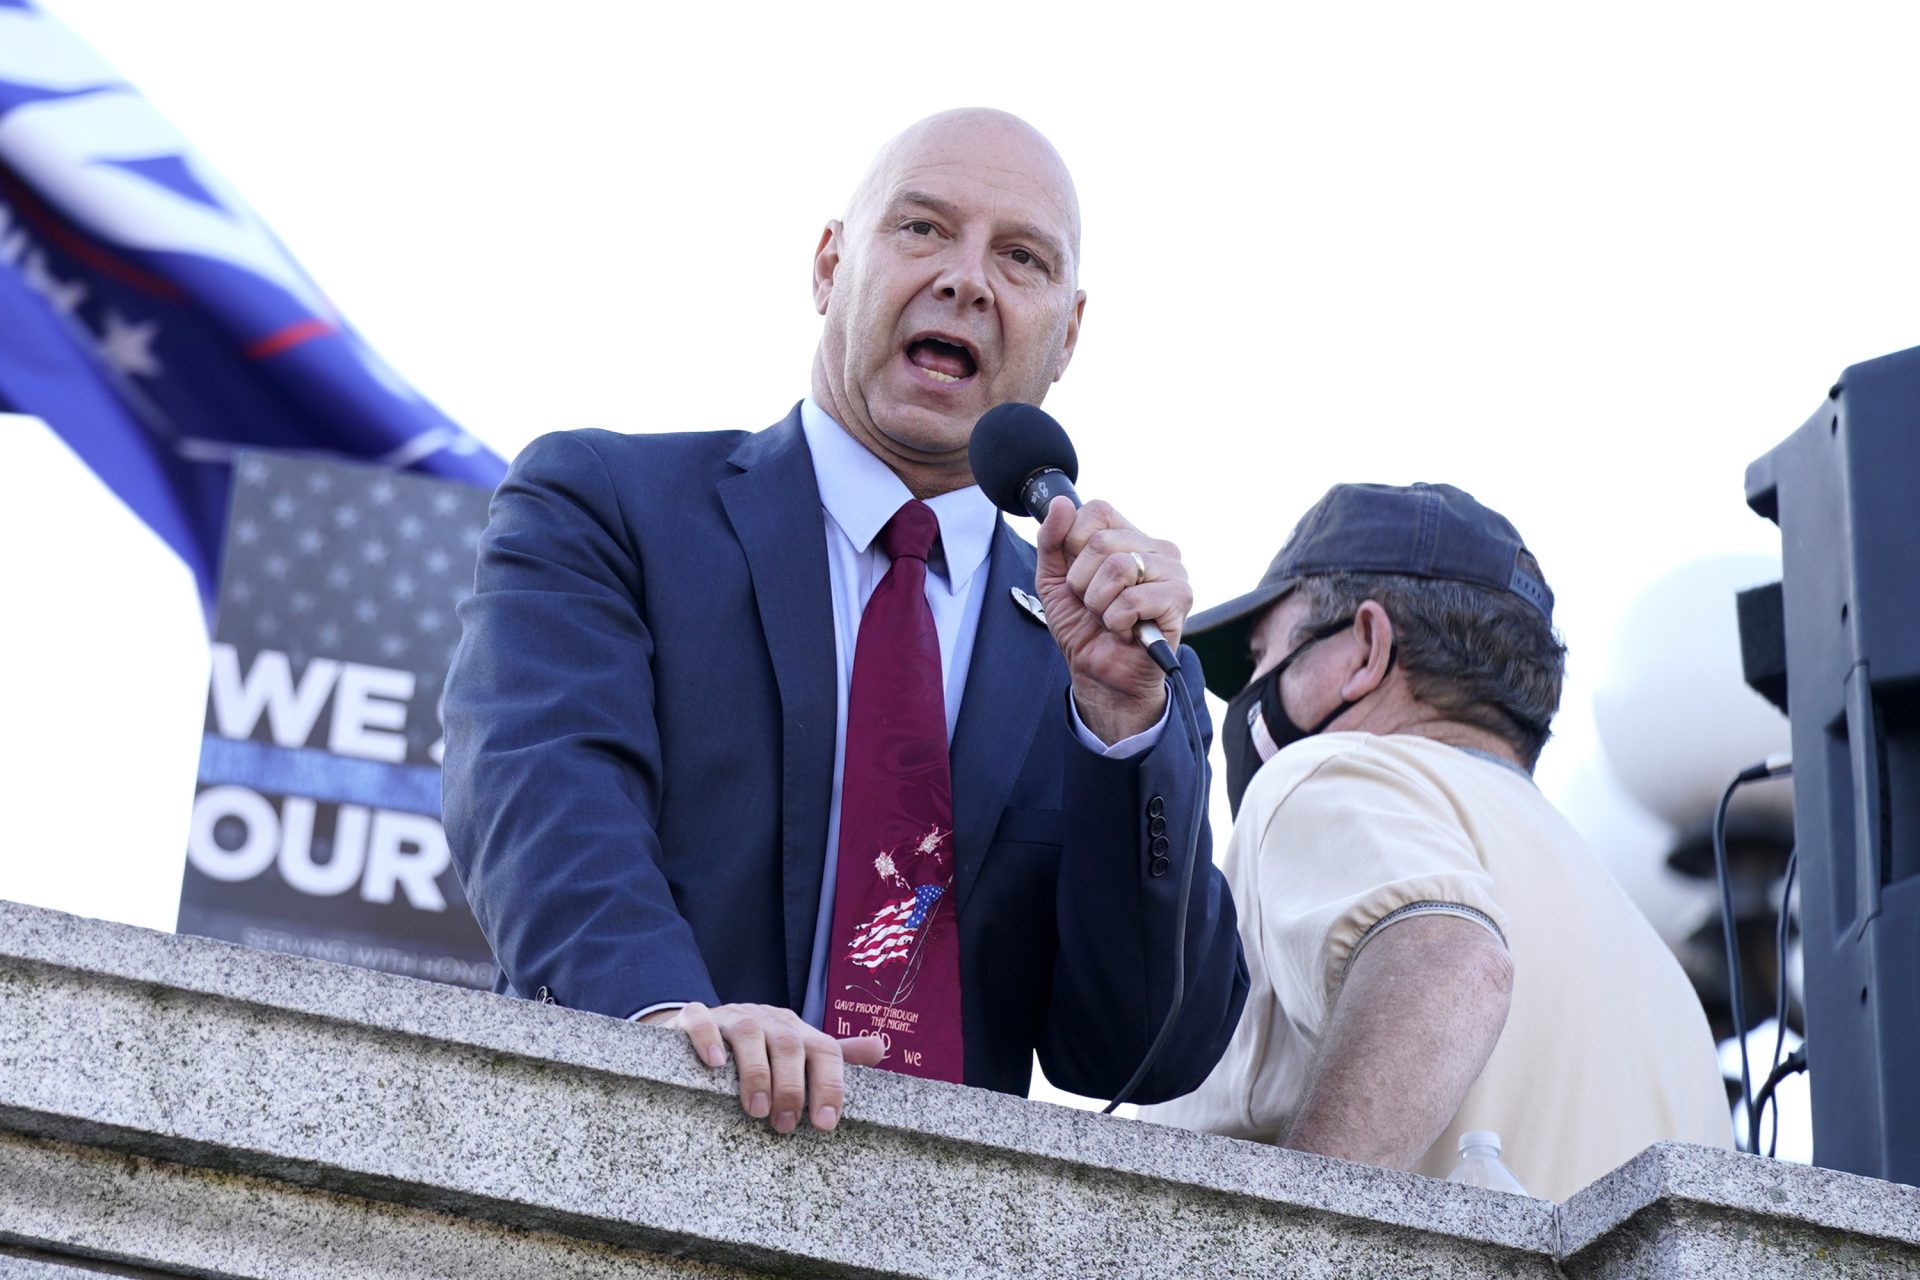 Pennsylvania state Sen. Doug Mastriano, R-Franklin, speaks to supporters of President Donald Trump as they demonstrate outside the Pennsylvania State Capitol, Saturday, Nov. 7, 2020, in Harrisburg, Pa., after Democrat Joe Biden defeated Trump to become 46th president of the United States.